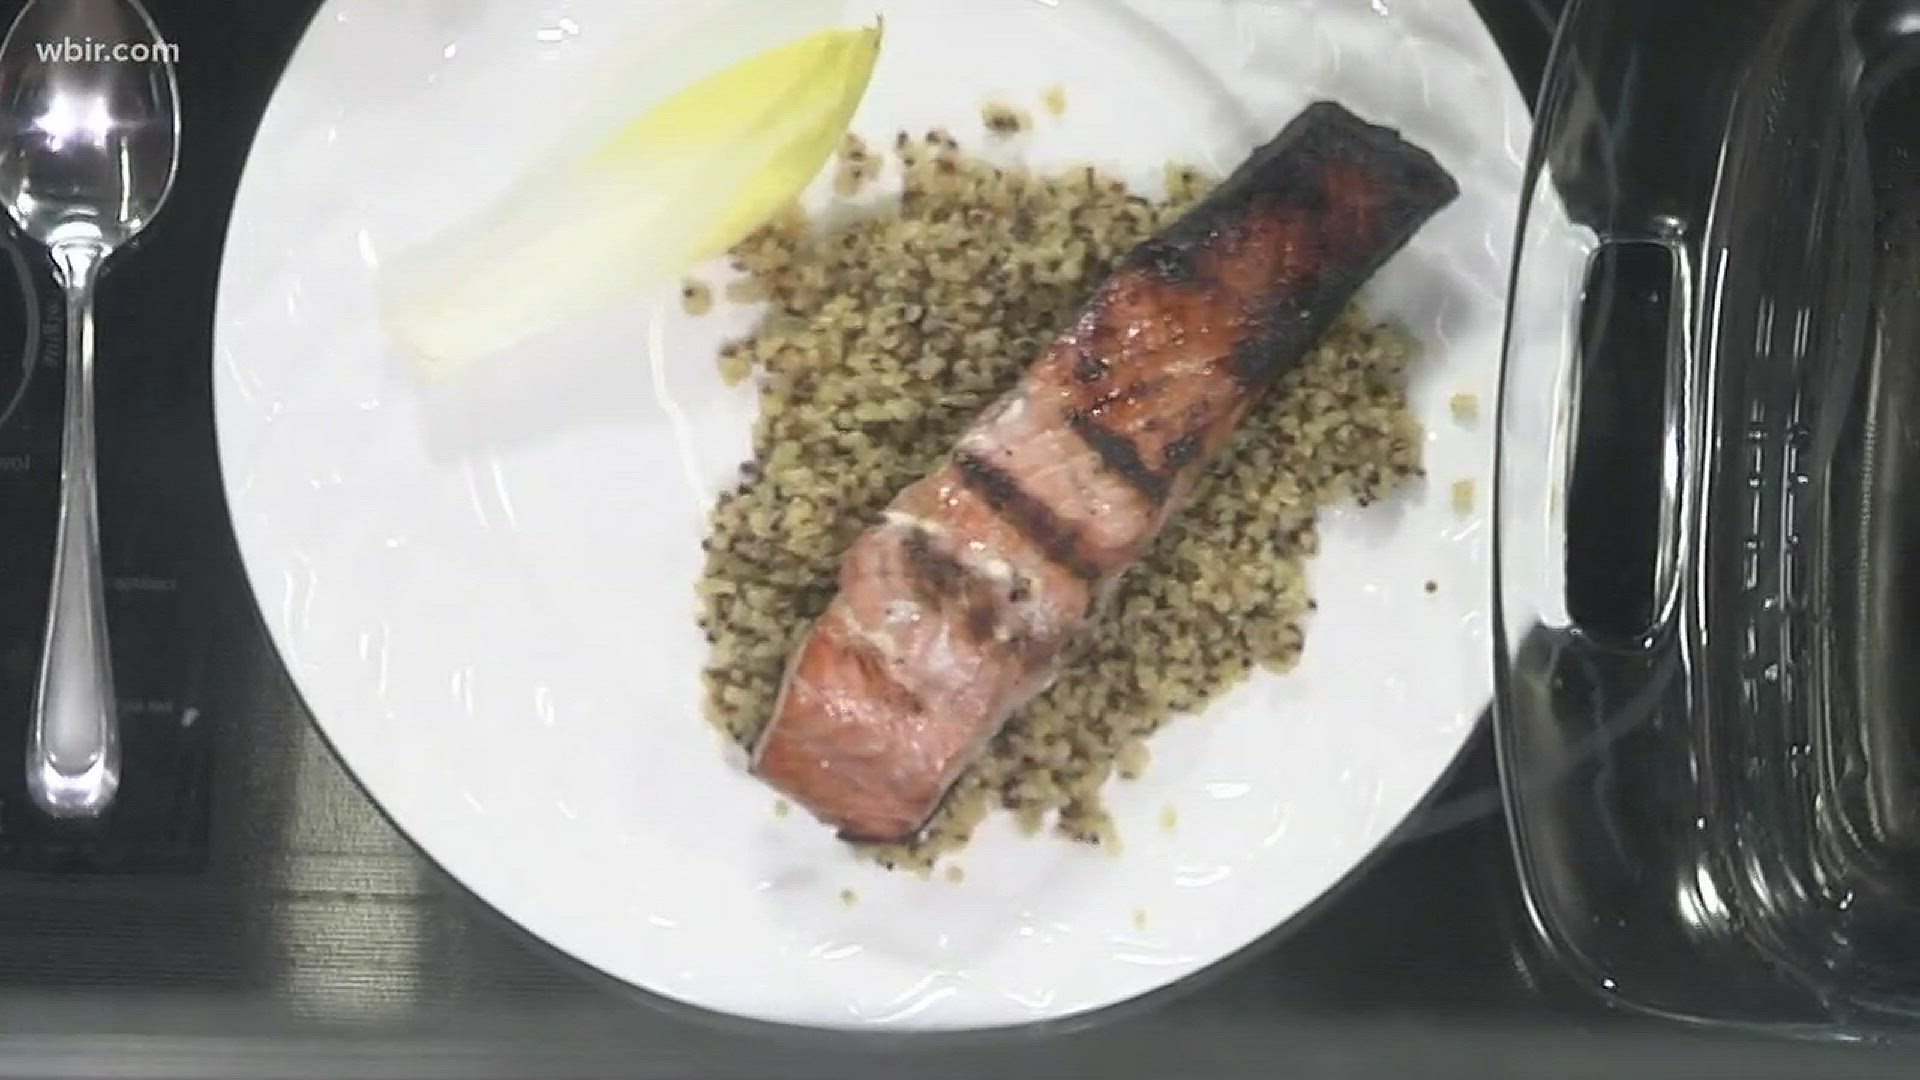 Scott and Michelle show us how to make a sweetheart salmon dinner that's good for your heart!